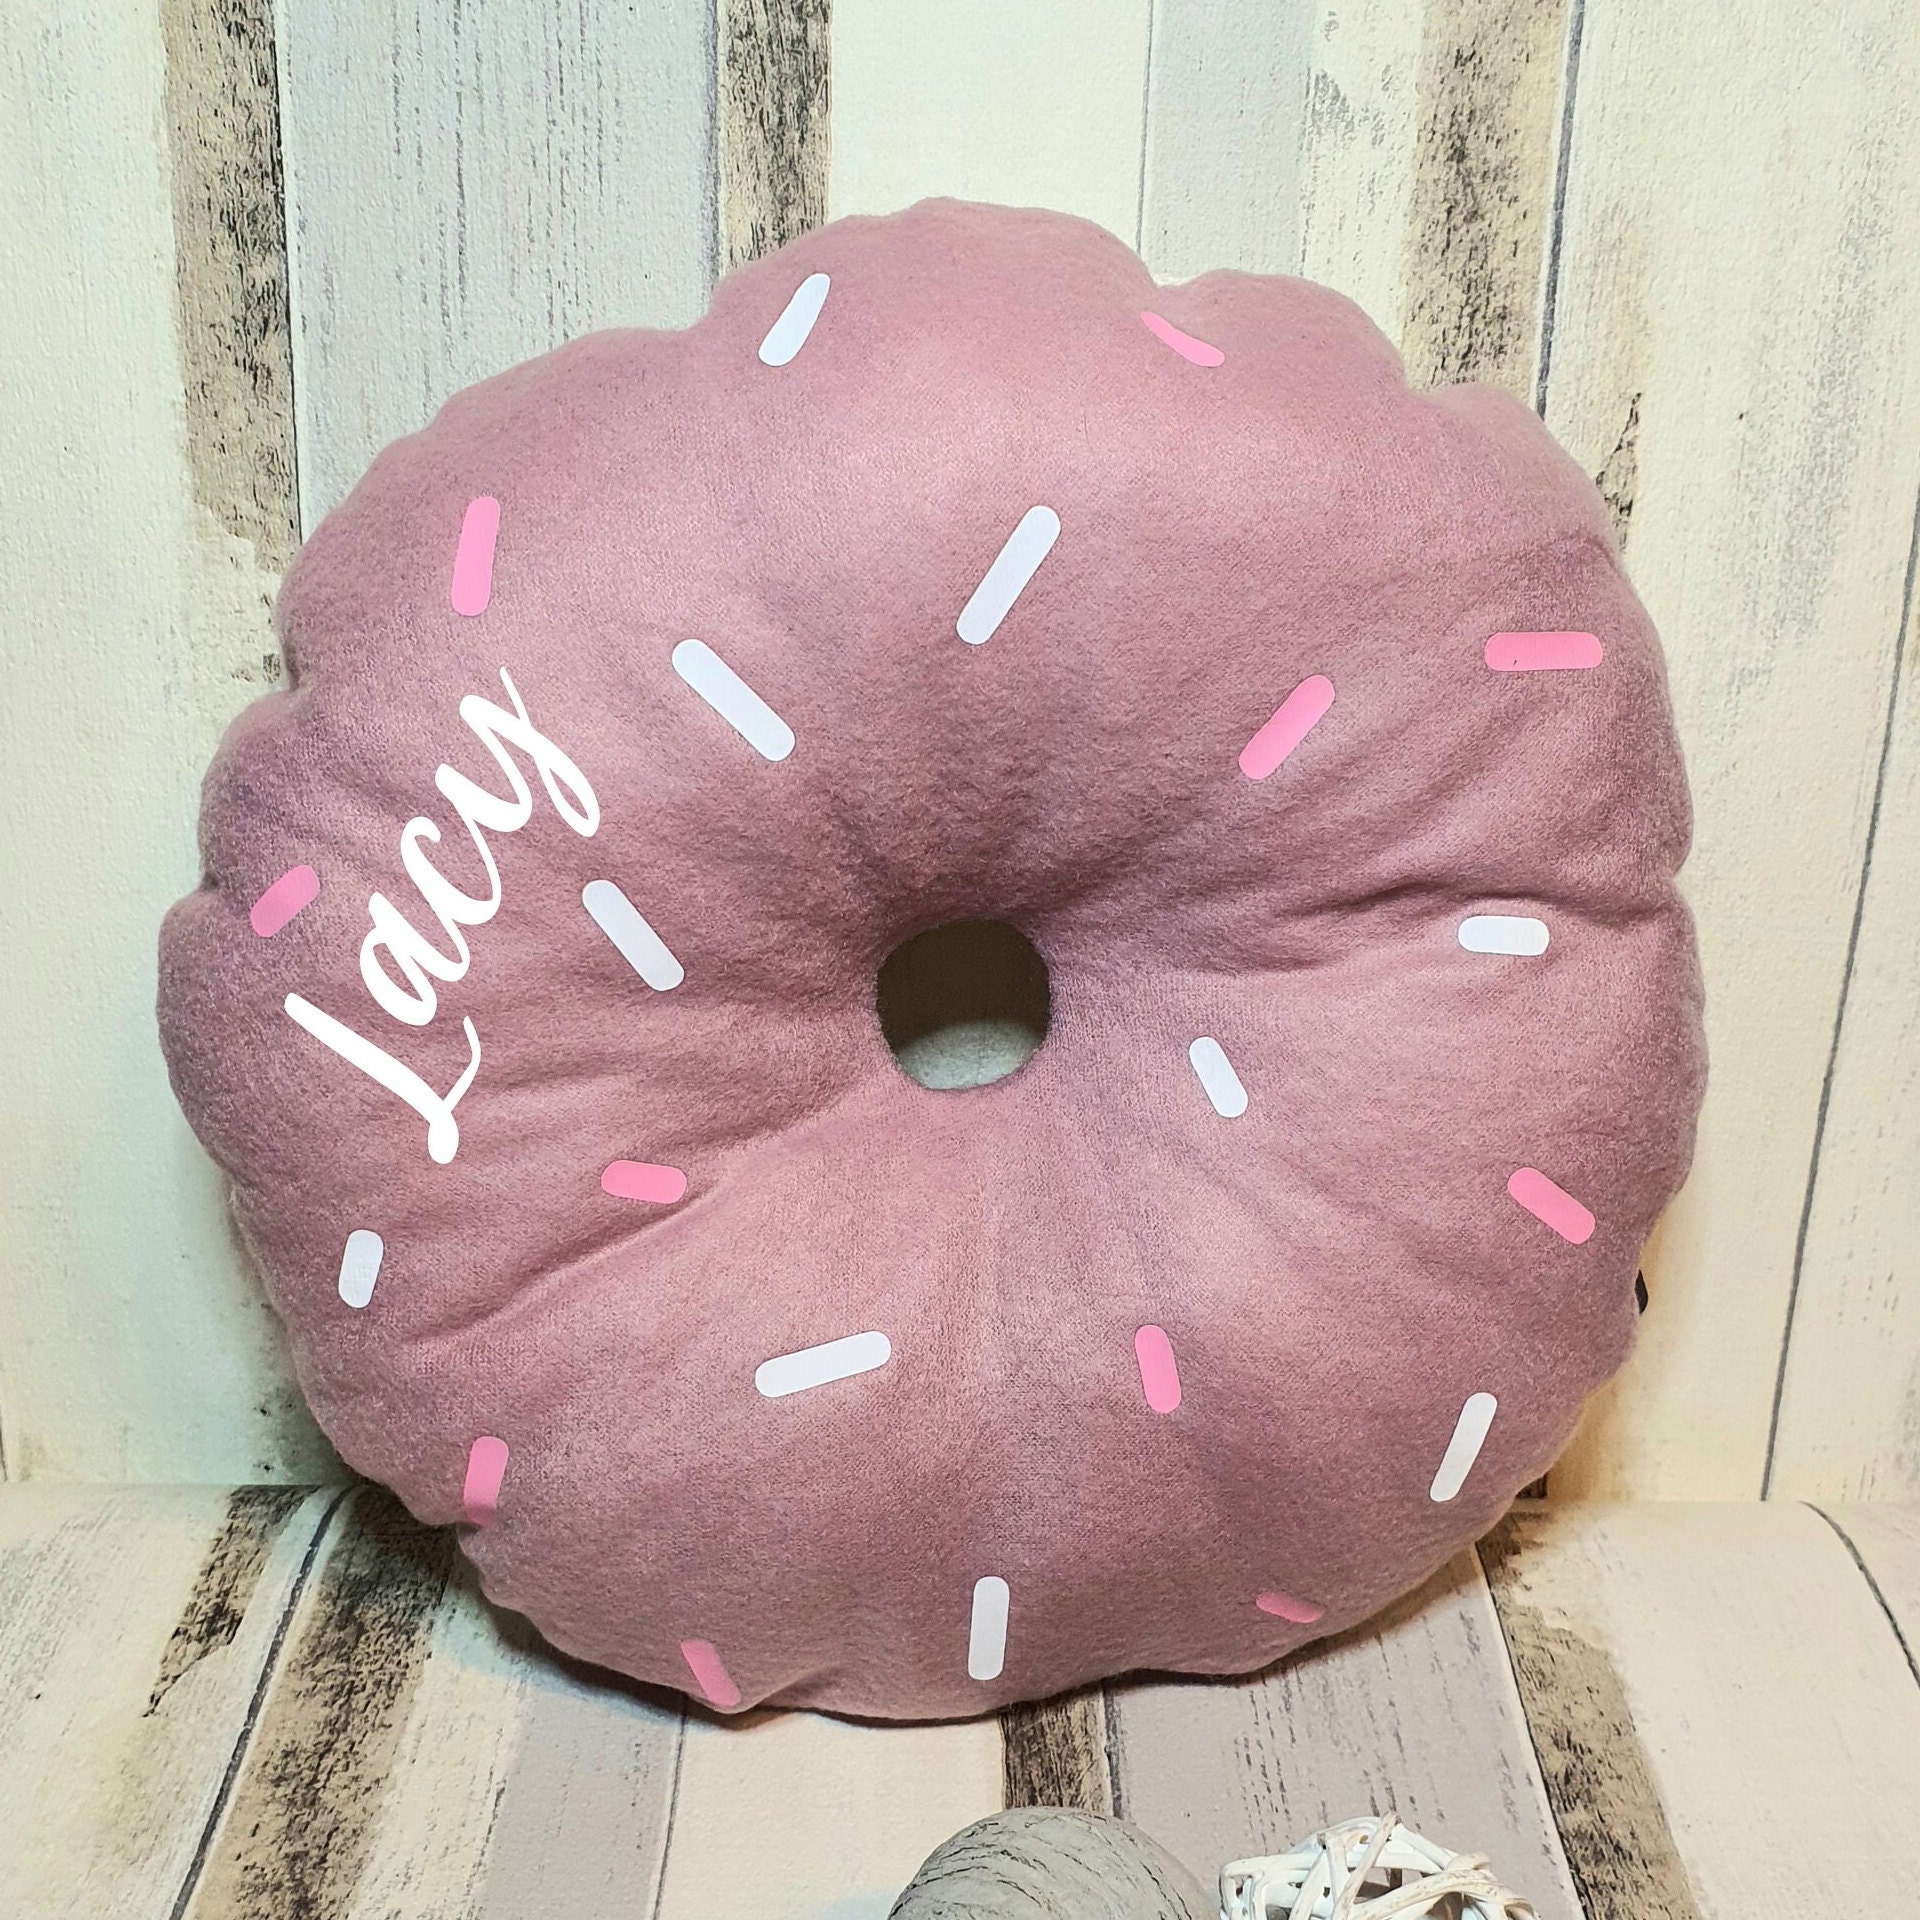 Giftoland Round Cushion Donut Shaped Pillow, For Multi purpose usage,  Size/Dimension: Standard